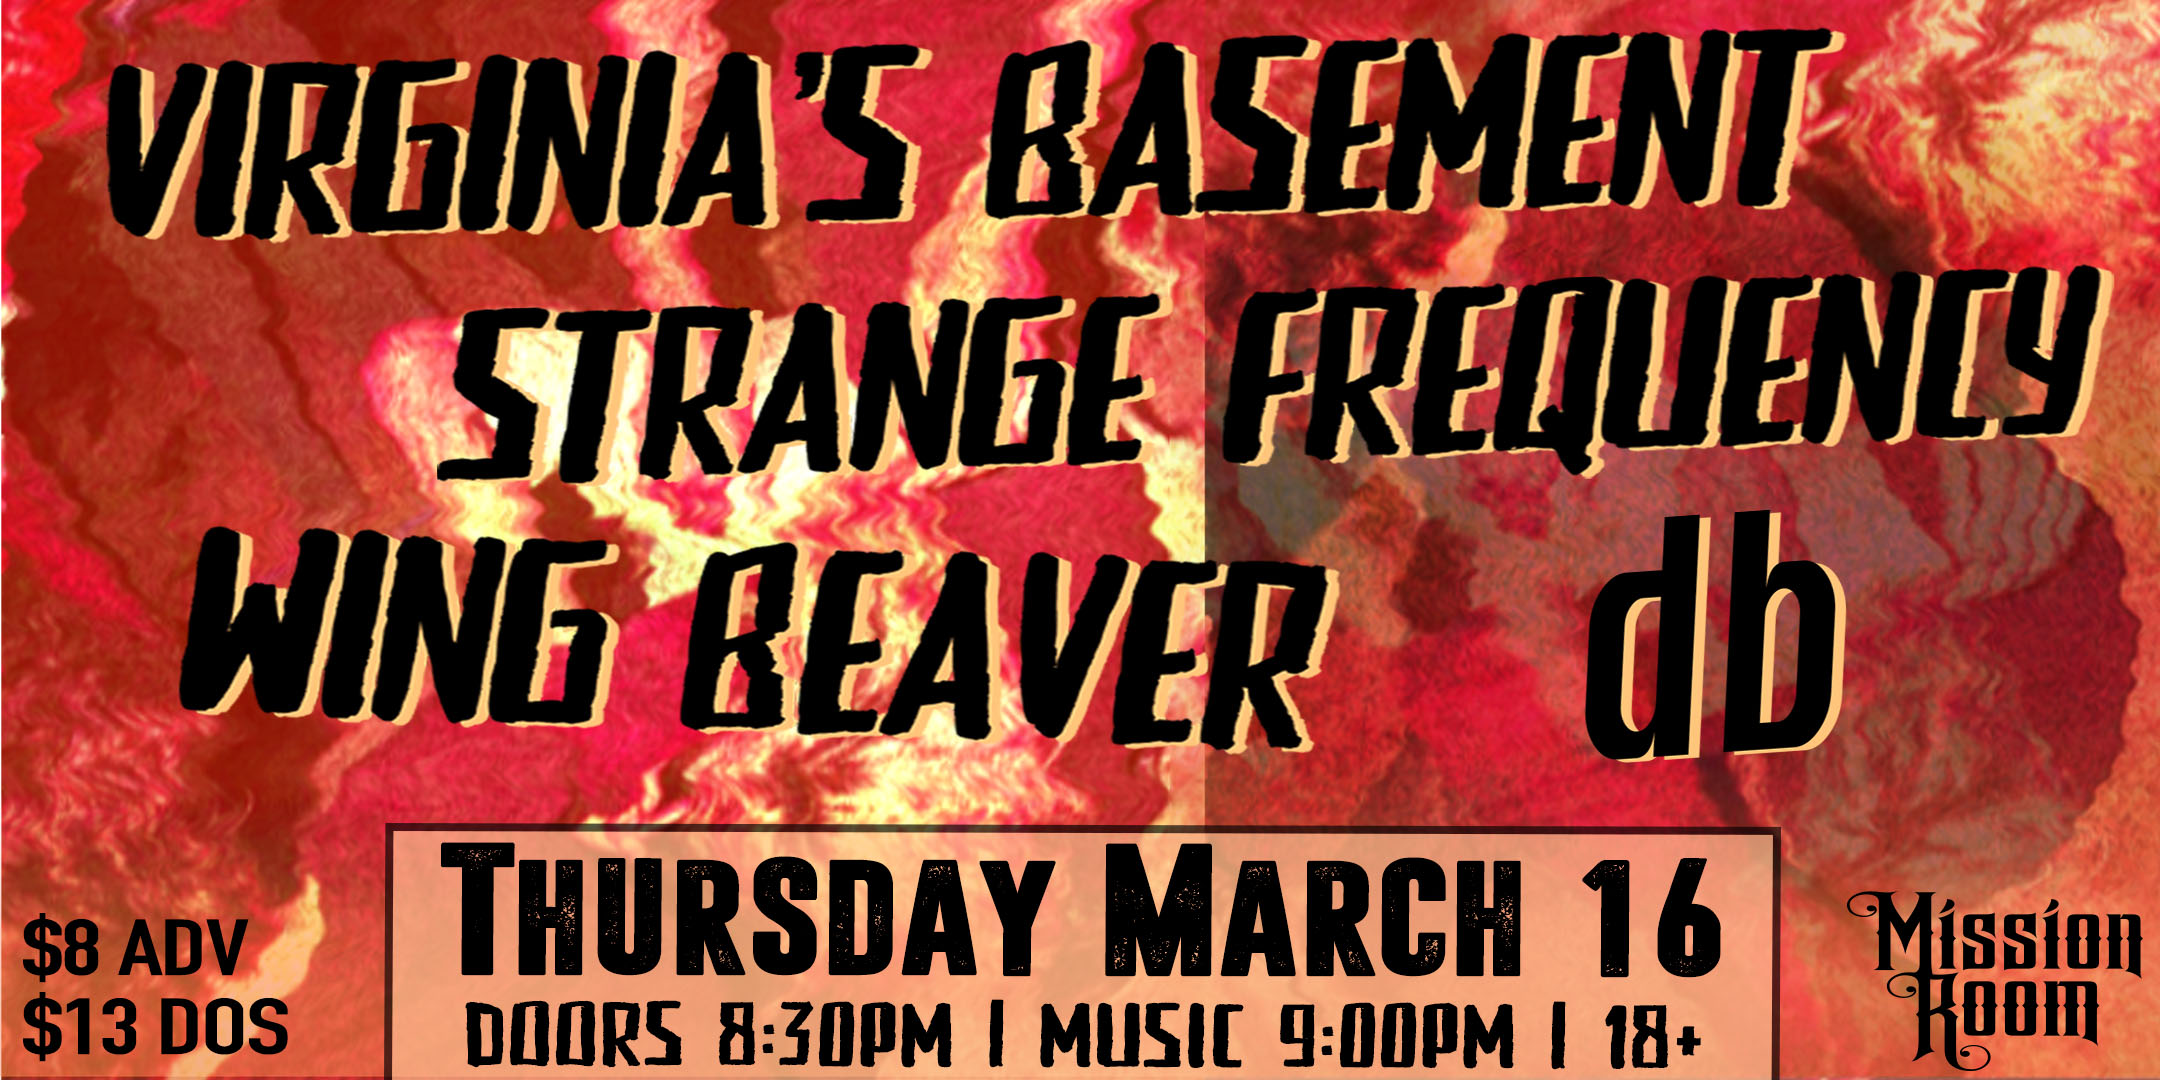 Virginia's Basement db Strange Frequency Wing Beaver Thursday March 16 The Hook and Ladder Theater Doors 8:30pm :: Music 9:00pm :: 18+ General Admission $8 ADV / $13 DOS NO REFUNDS